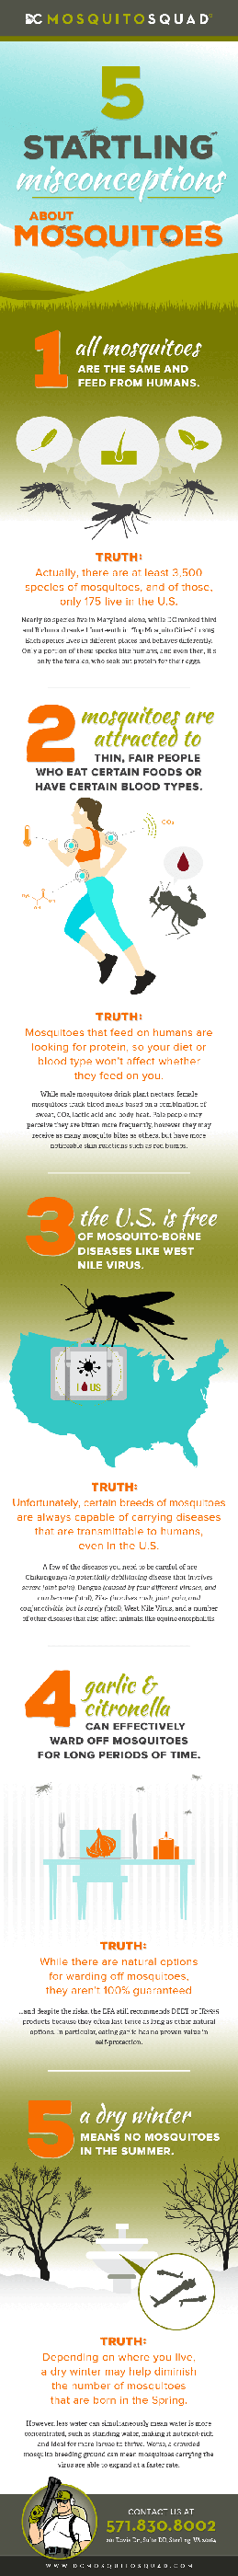 Infographic: 5 Startling Misconceptions About Mosquitoes